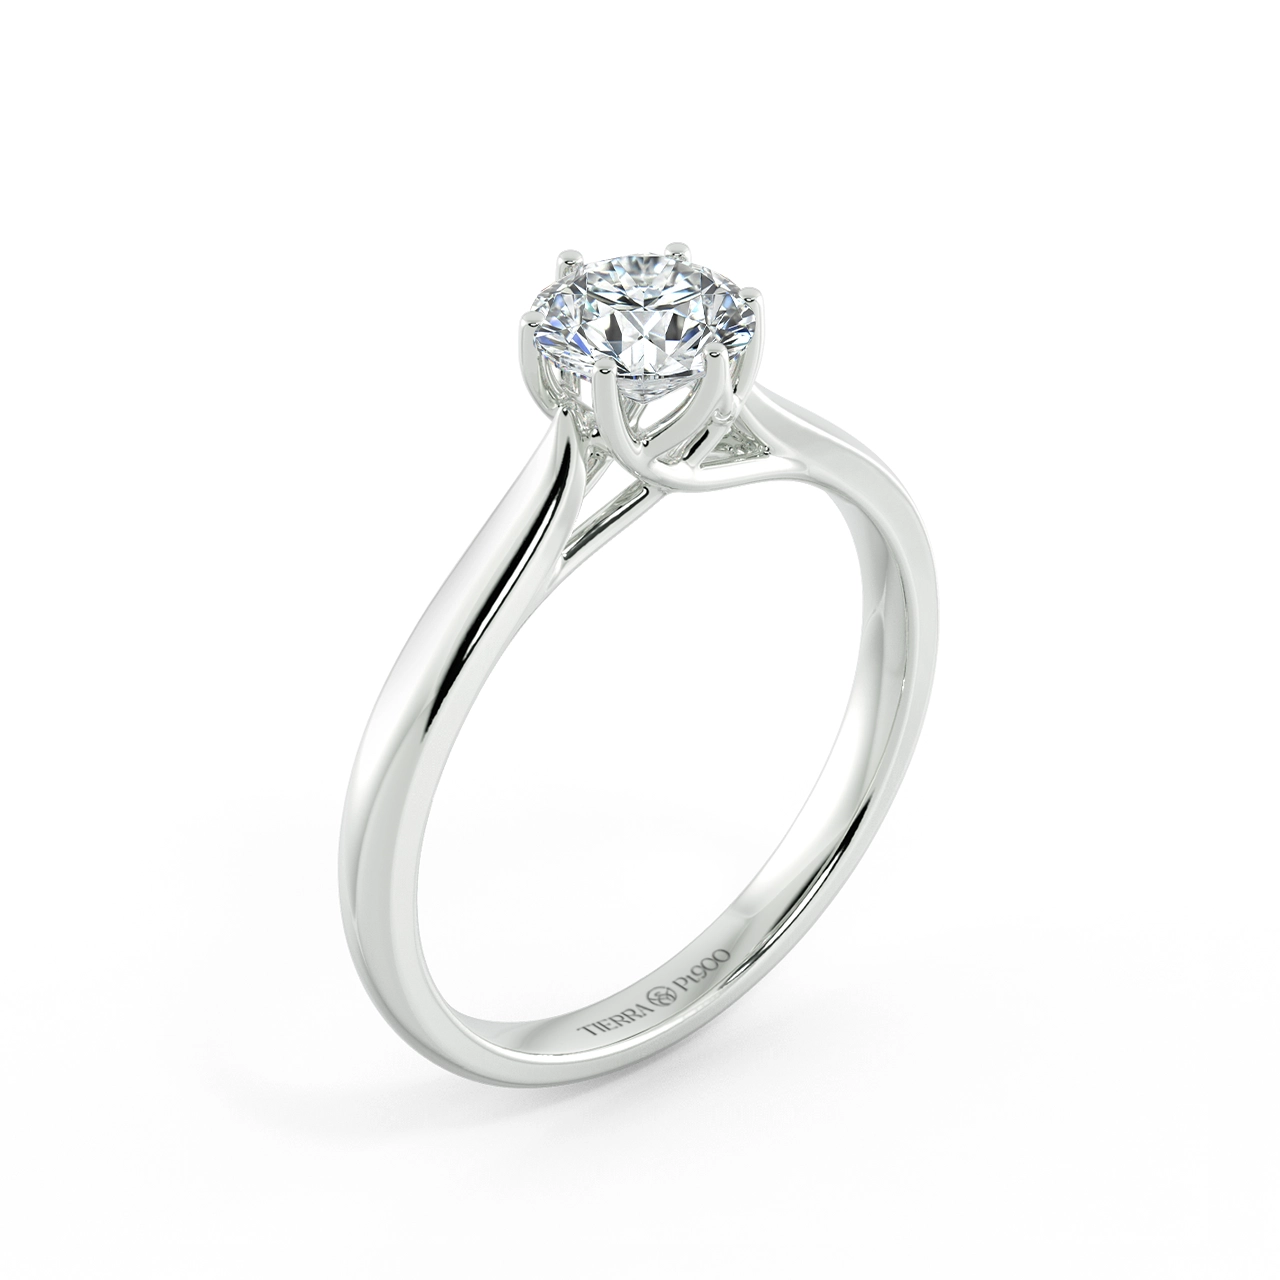 Six Prongs Trellis Engagement Ring with Shiny Band NCH1407 4